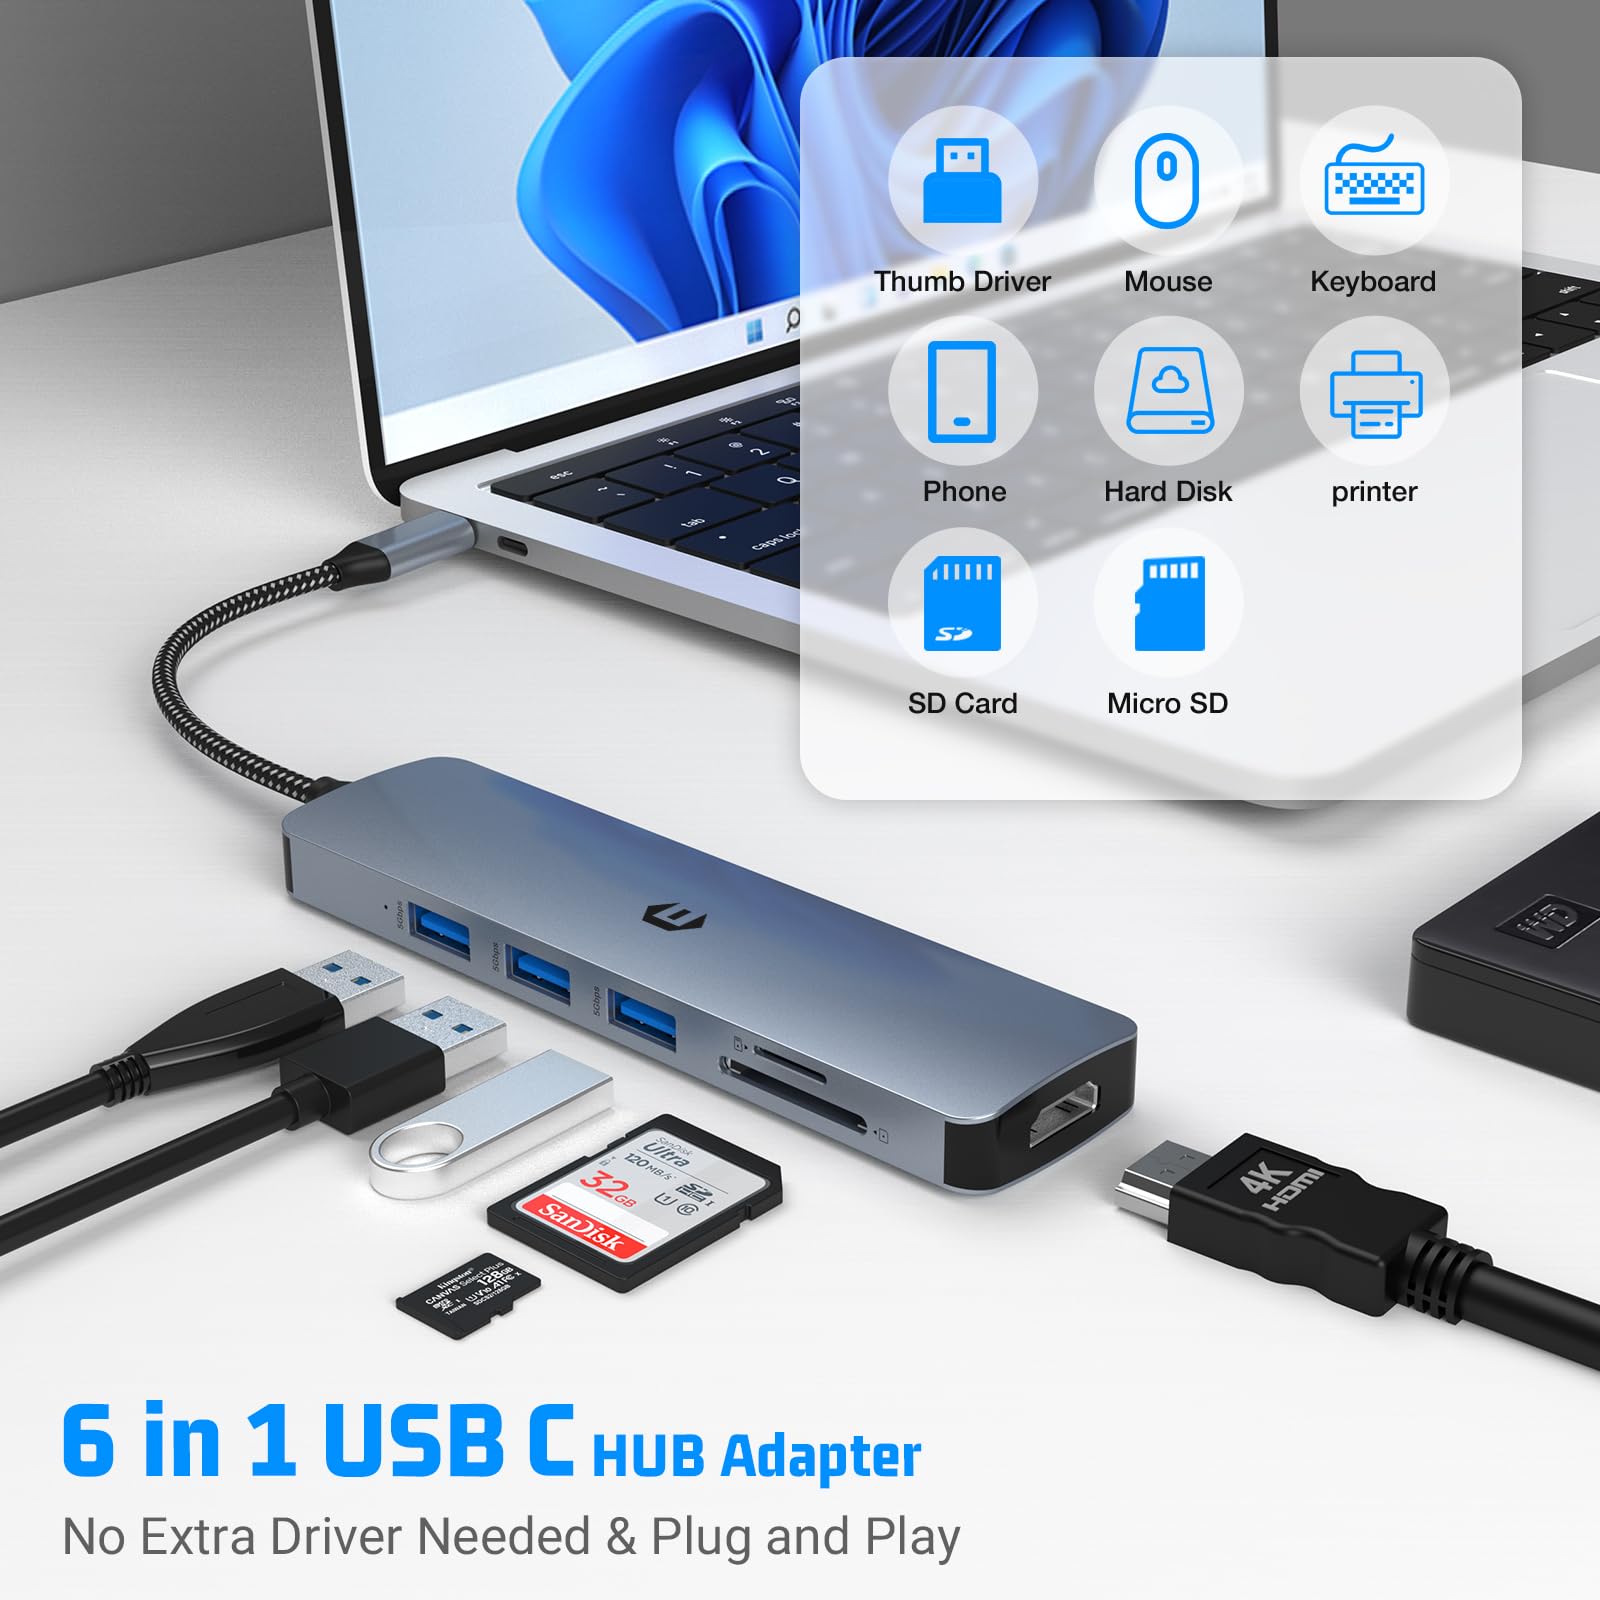 Tymyp USB C Hub, 6 in 1 USB C to USB Adapter, Incorporating 4K HDMI, 3 x USB 3.0, SD/TF Card Slot, Tailored for New Laptop and Type C Devices